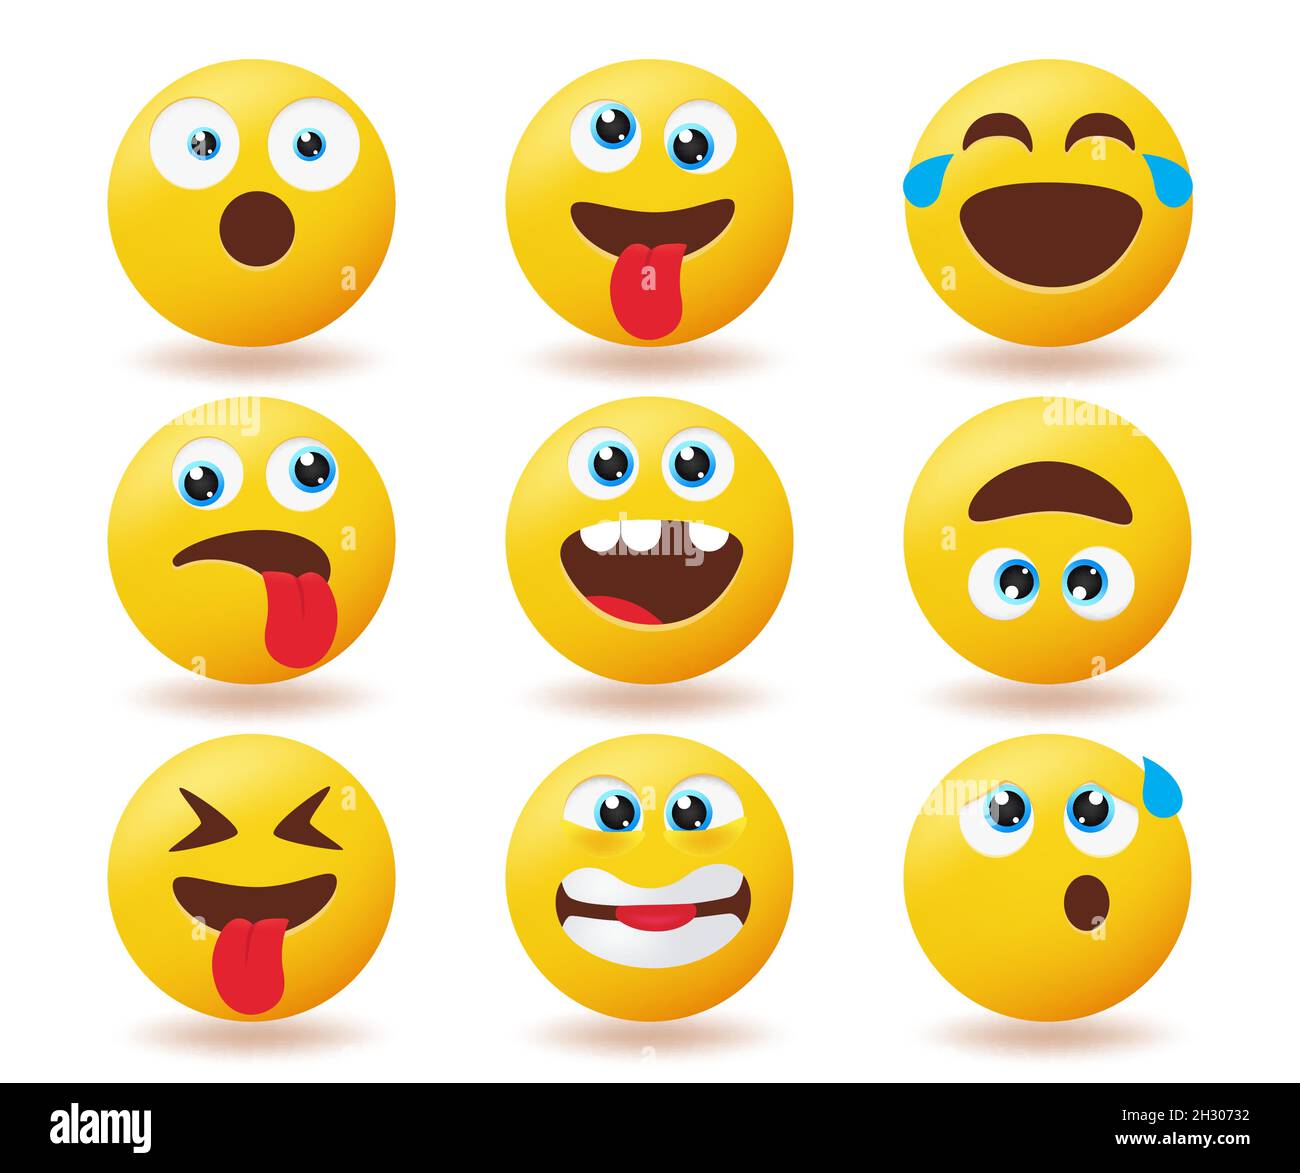 Emoji emoticons reaction vector set. Smiley icon characters with funny and weird smileys collection isolated in white background for emojis facial. Stock Vector